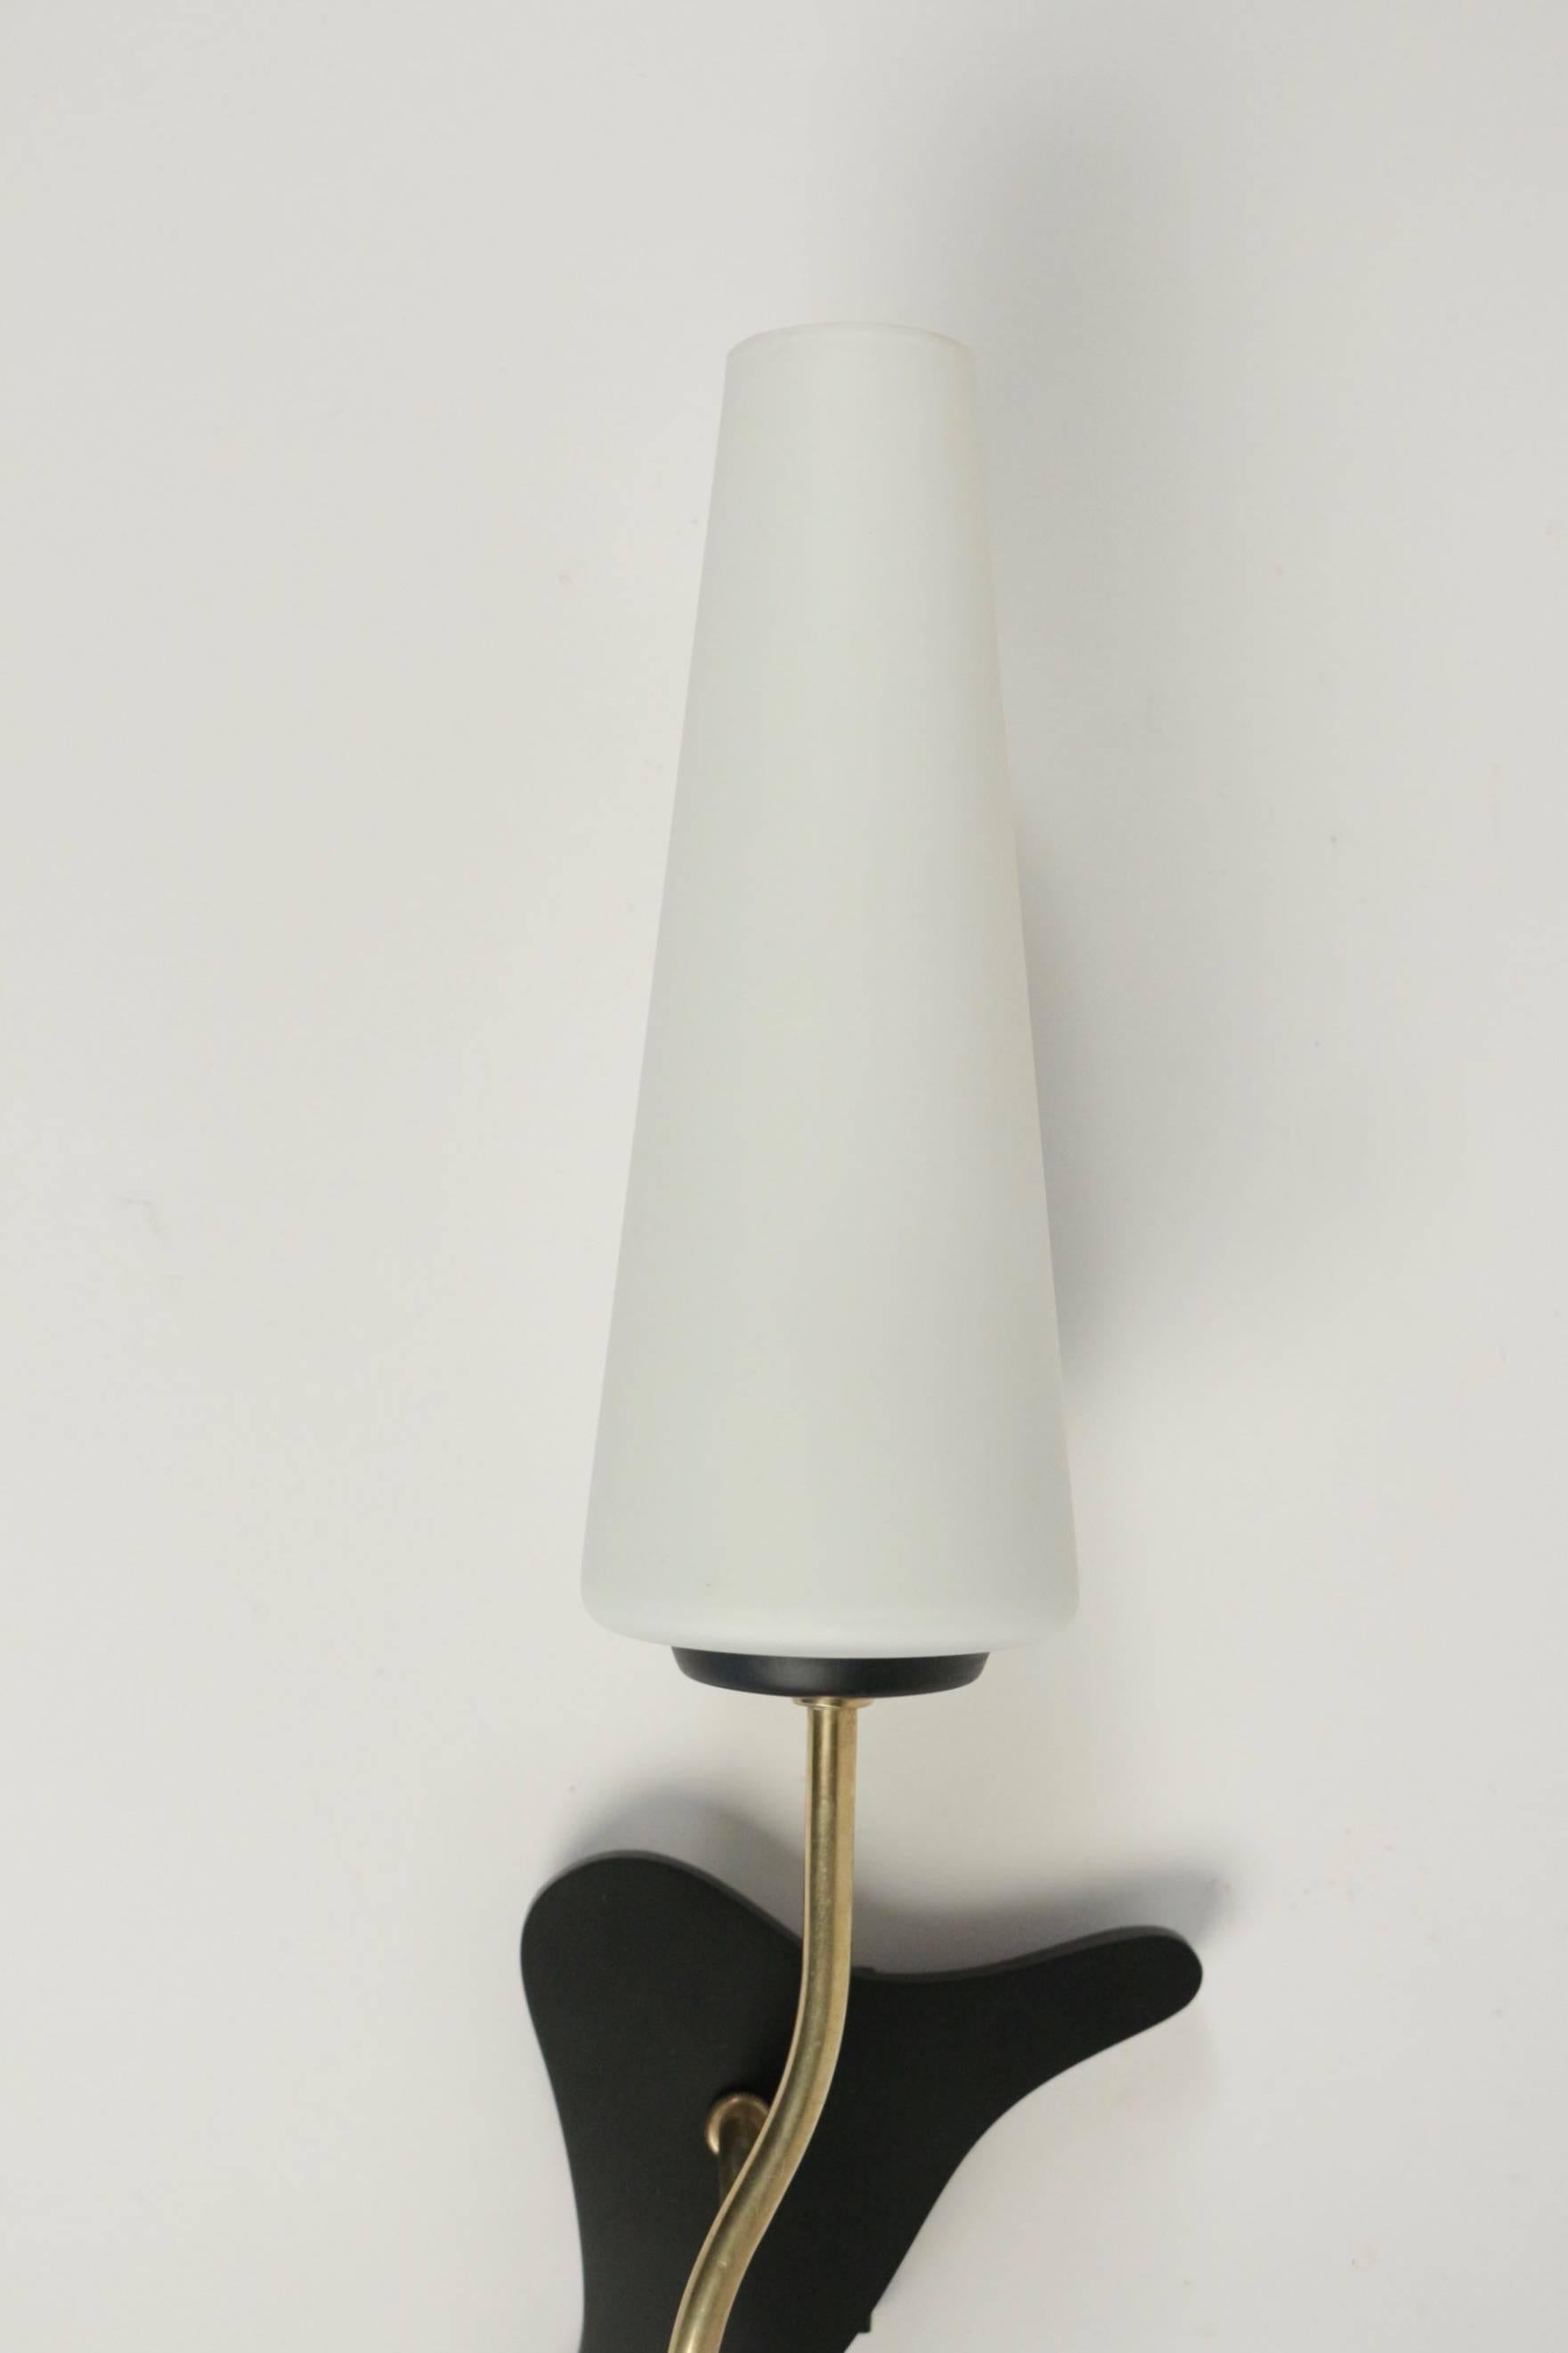 1950s Pair of Arlus Sconces.

The back plates are made of black matt lacquered metal. 
The conical white satine glass lampshade is mounted on curved brass arm.

One bulb per sconce.